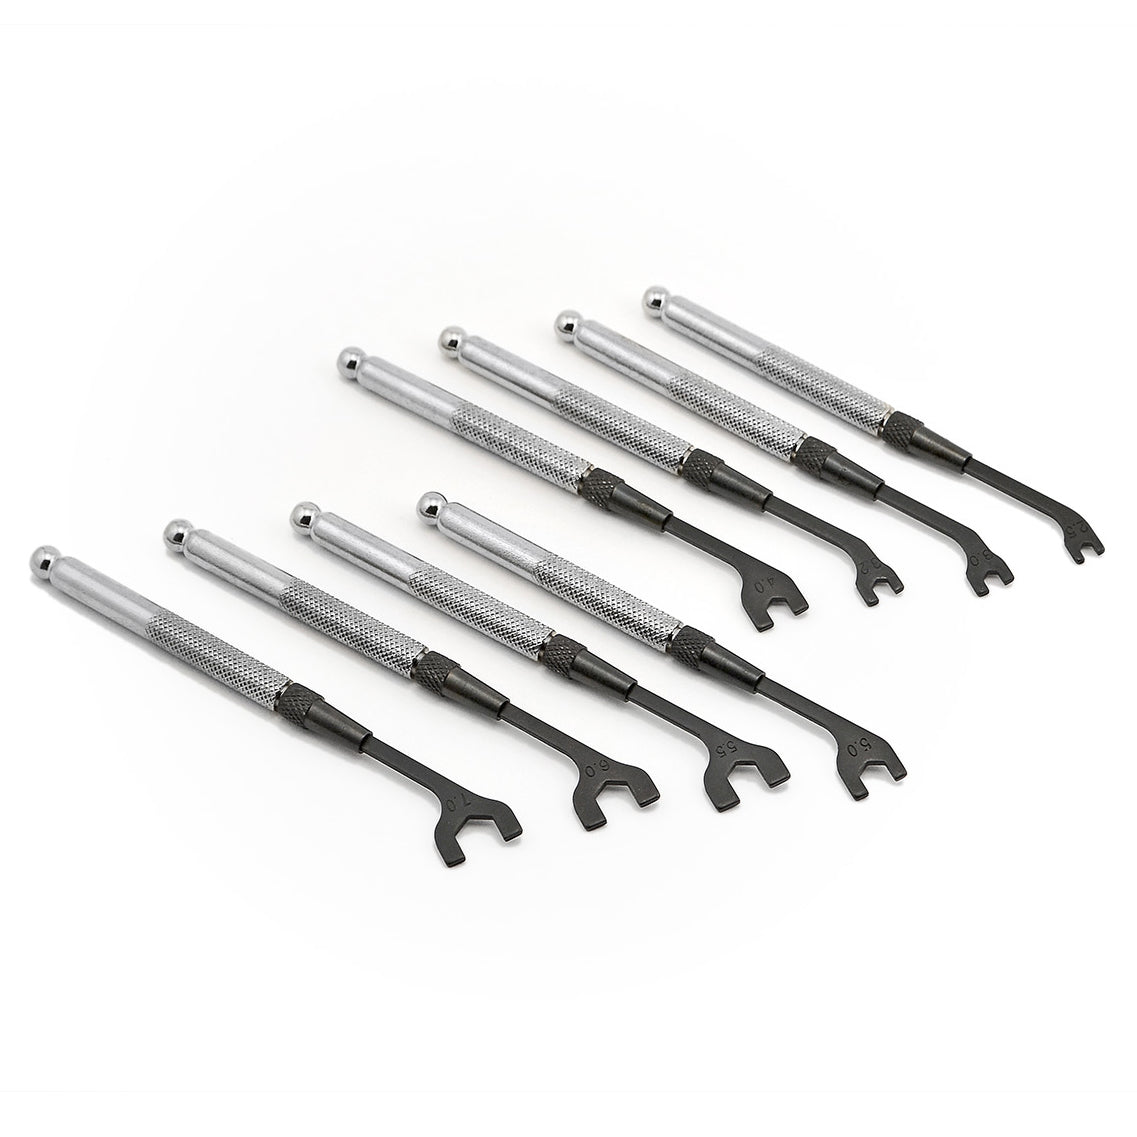 8 - piece Open Ended Wrench Metric Set